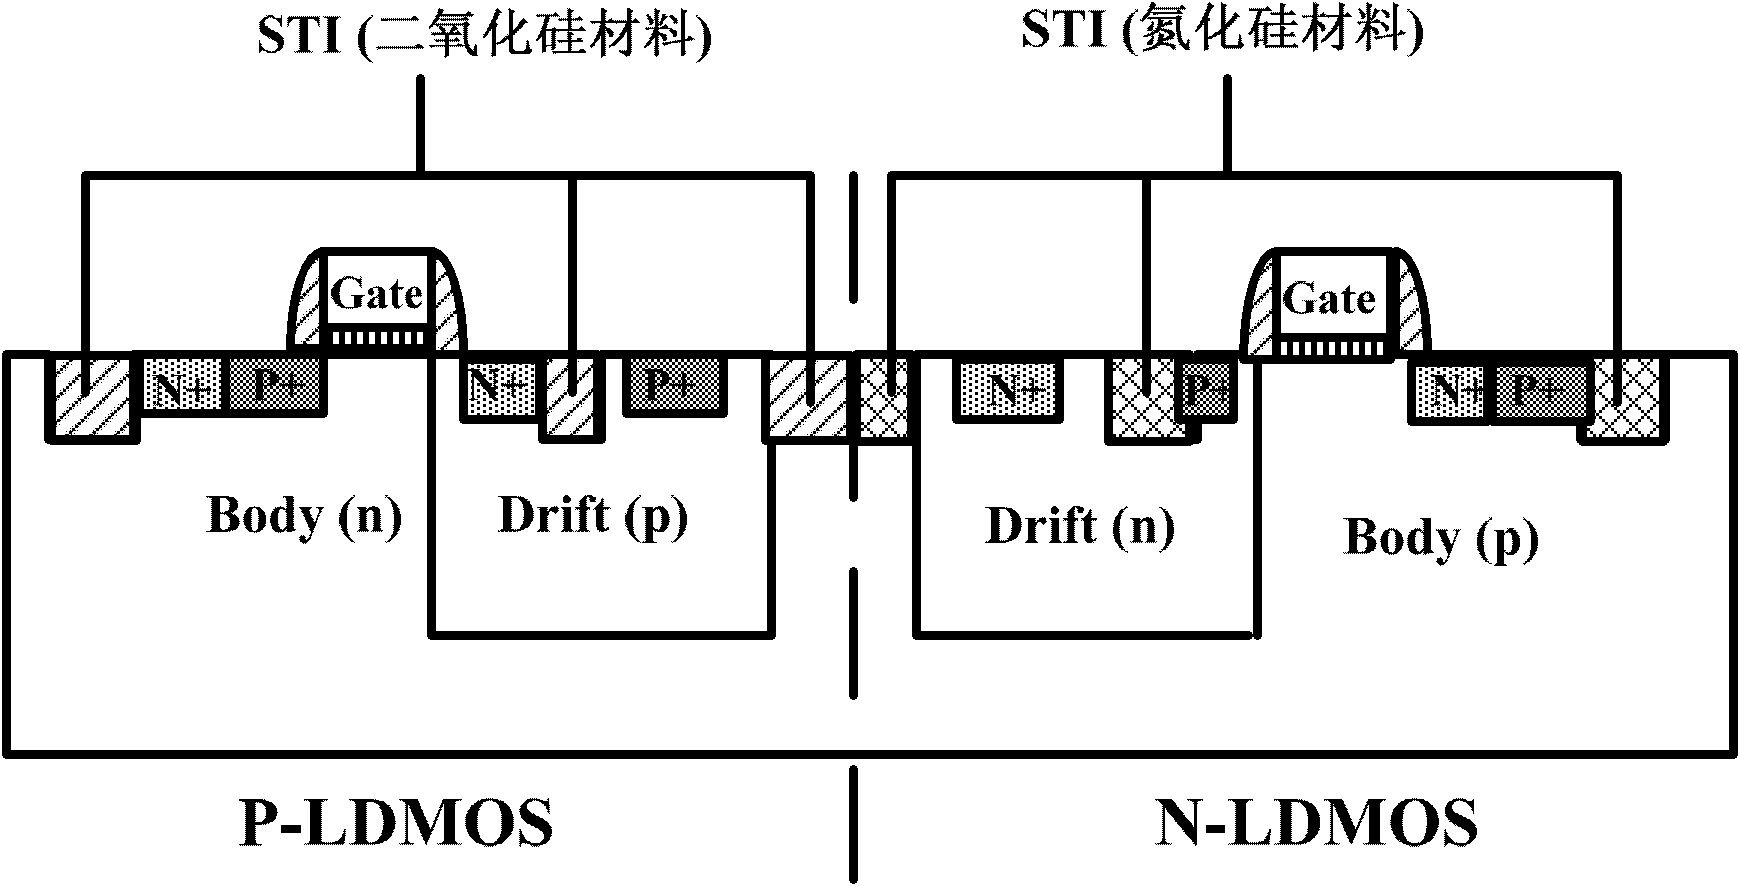 Method for enhancing radiation resistant characteristic of LDMOS (Laterally Diffused Metal Oxide Semiconductor)